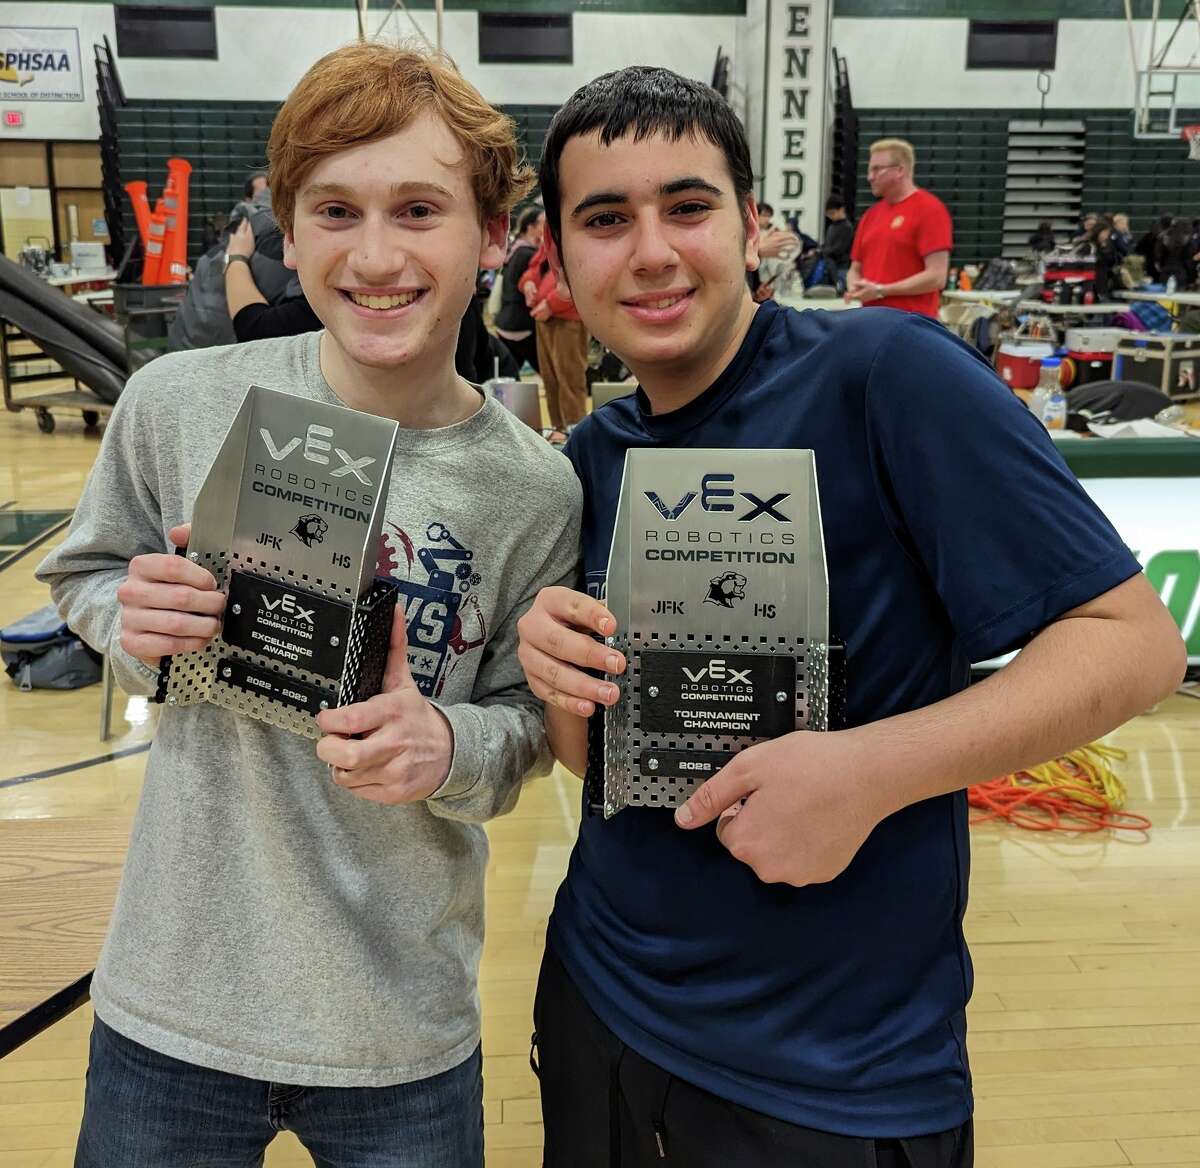 Harvey RoboCavs Blake Friedman of Cos Cob and his teammate Ben Zilberstein show their joy at winning the robotics tournament and receiving the prestigious Excellence Award.